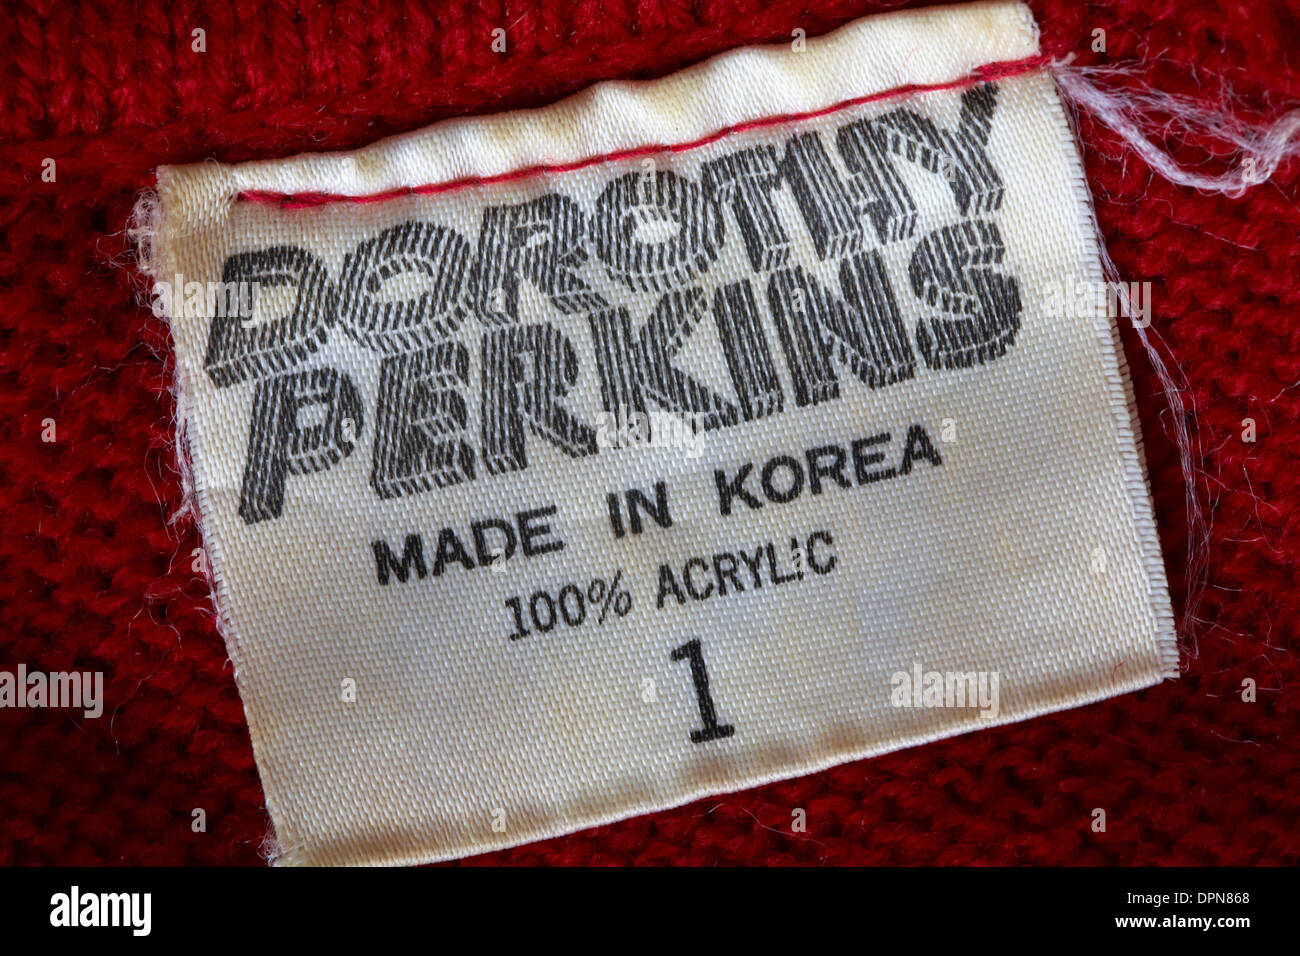 label in garment - Dorothy Perkins Made in Korea 100% acrylic - sold in the  UK United Kingdom, Great Britain Stock Photo - Alamy